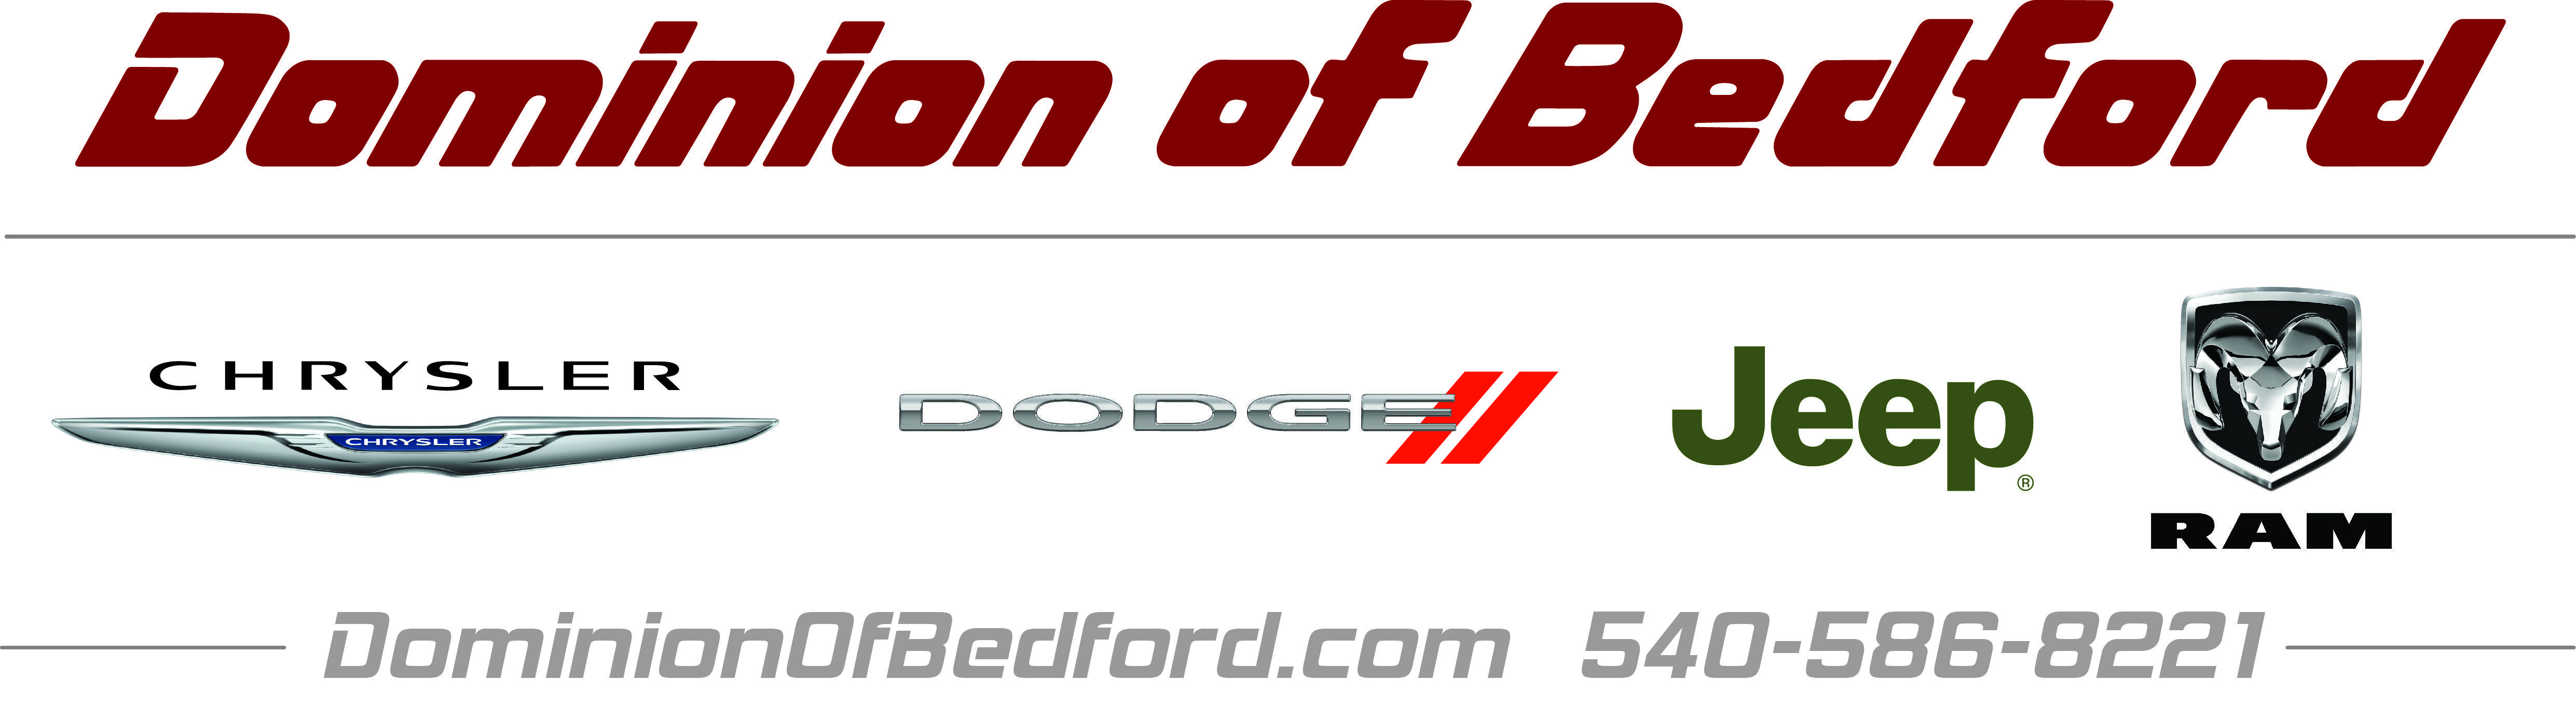 Bedford Logo - Supporters